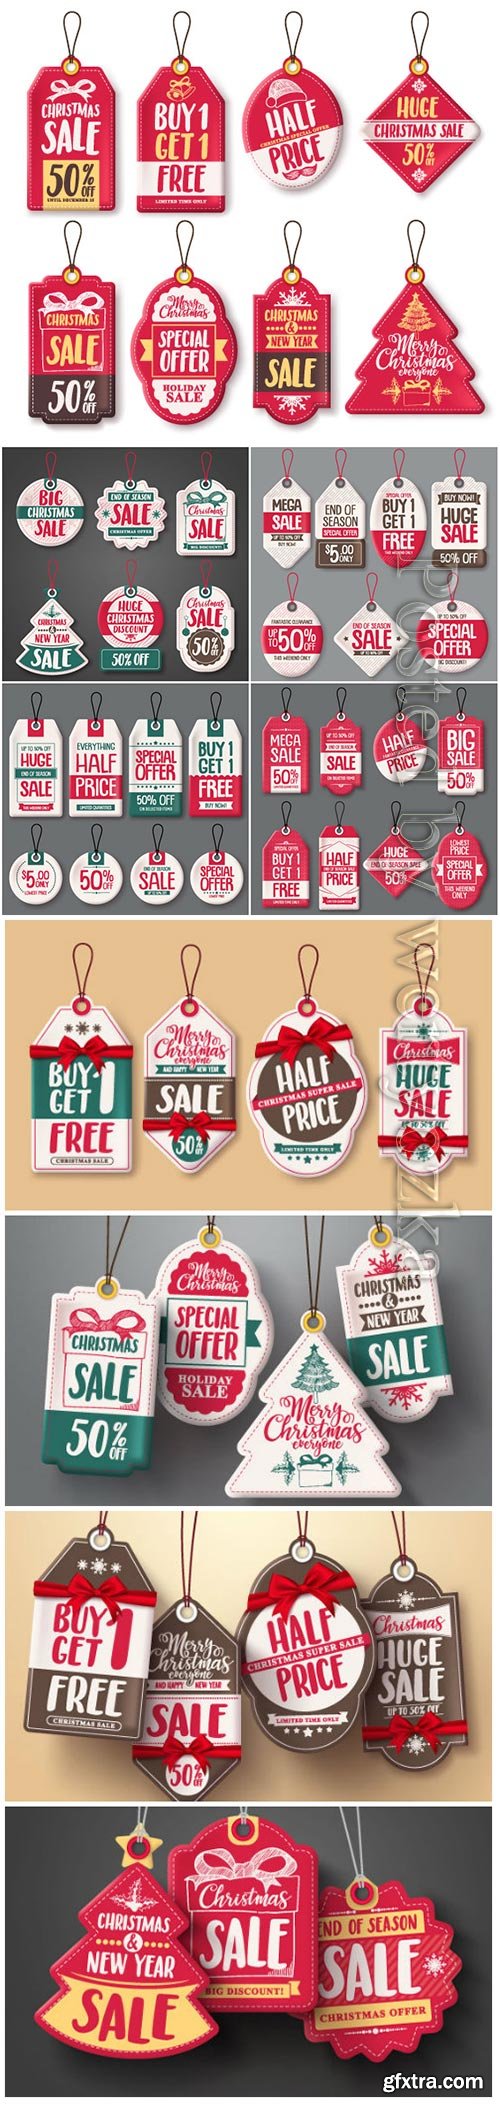 Christmas hanging sale tags vector set in white color with different shapes and greetings